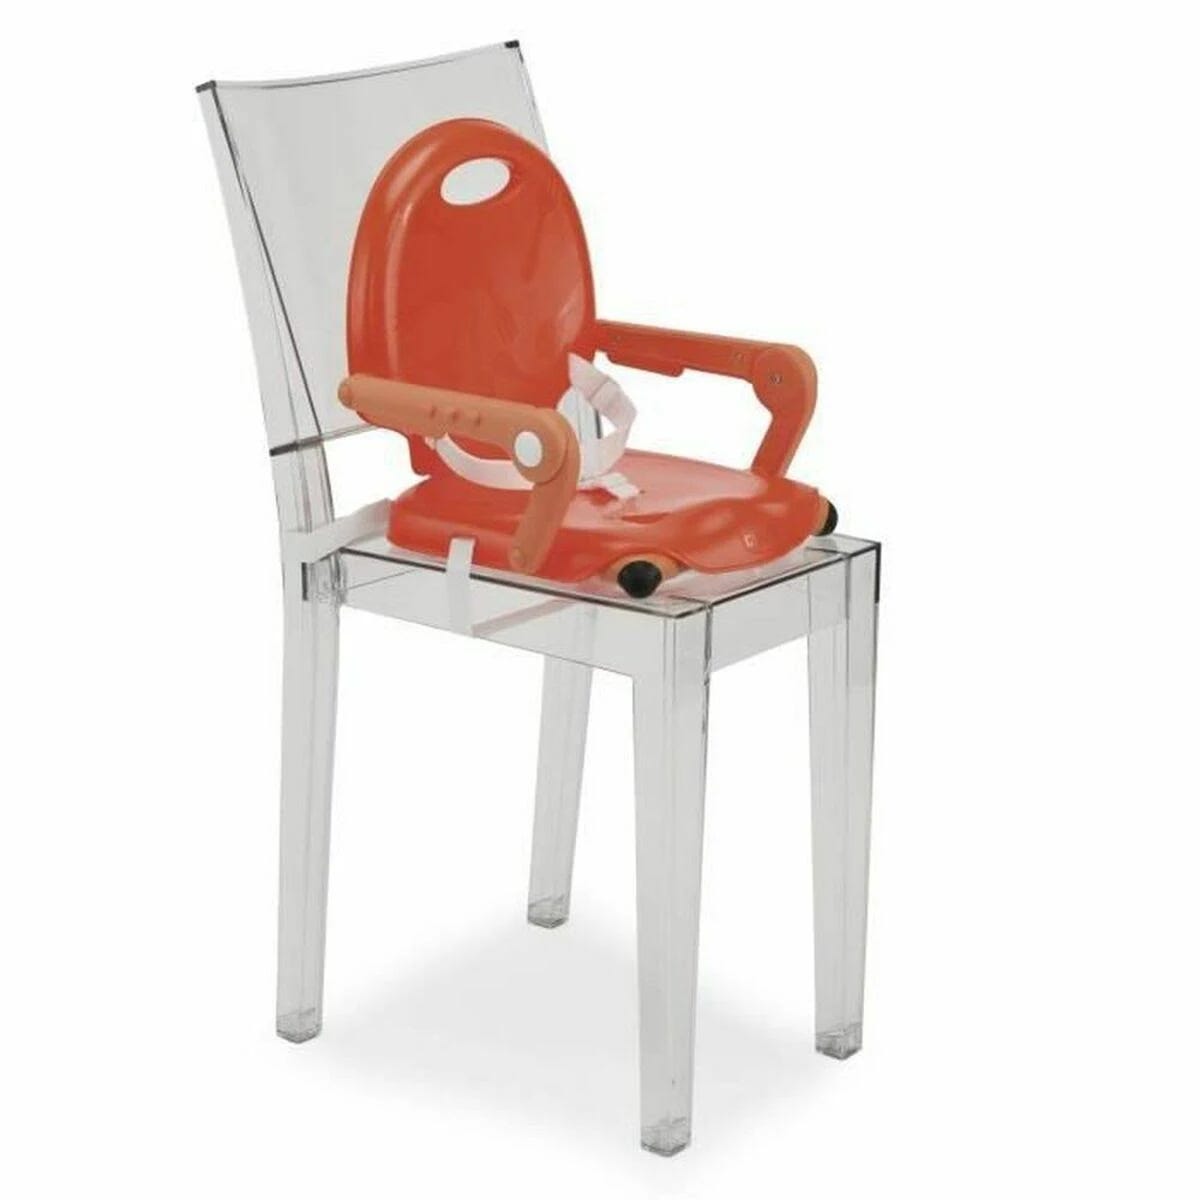 Portable Chicco Booster Seat for On-the-Go Dining | Image